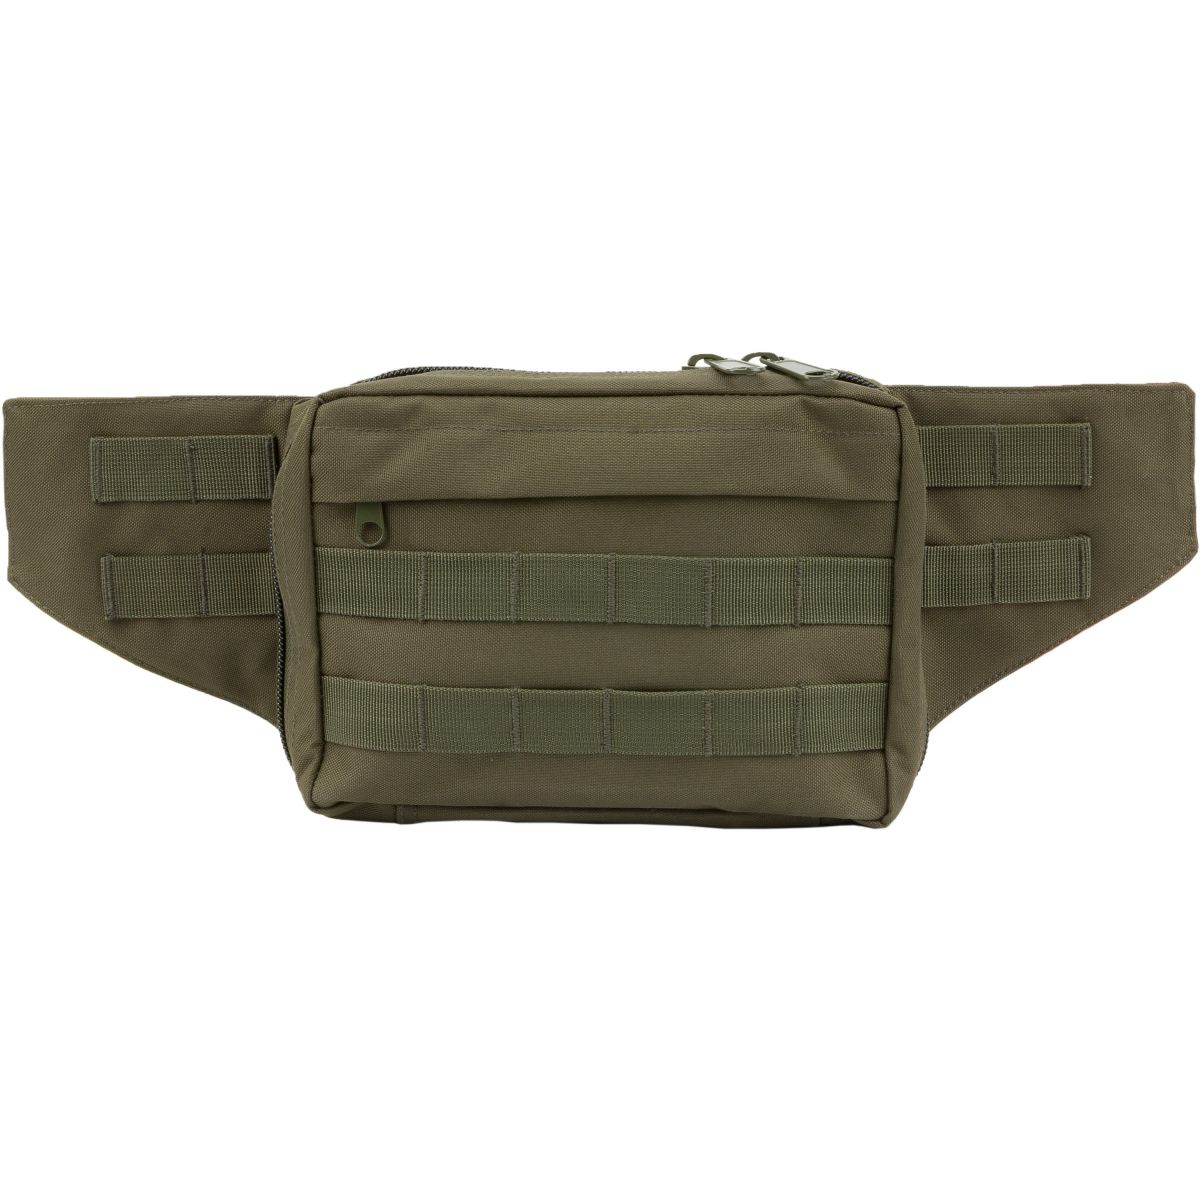 Purchase the Mil-Tec Pistol Hip Bag olive by ASMC